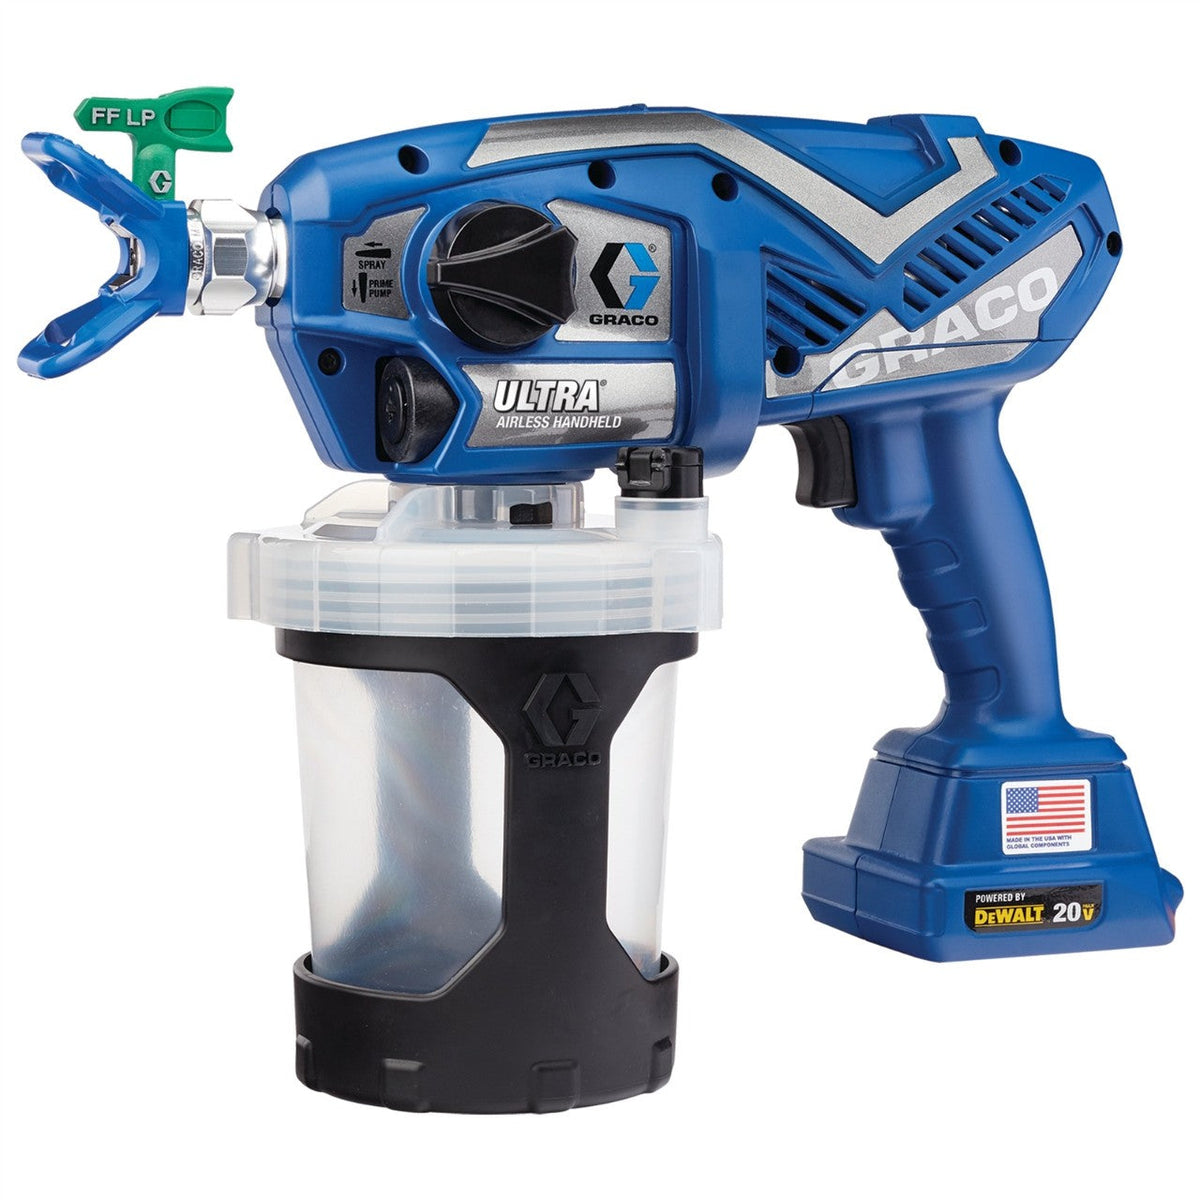 Graco 17P515 Ultra Cordless Airless Handheld Paint Sprayer - Tool Only - The Paint People